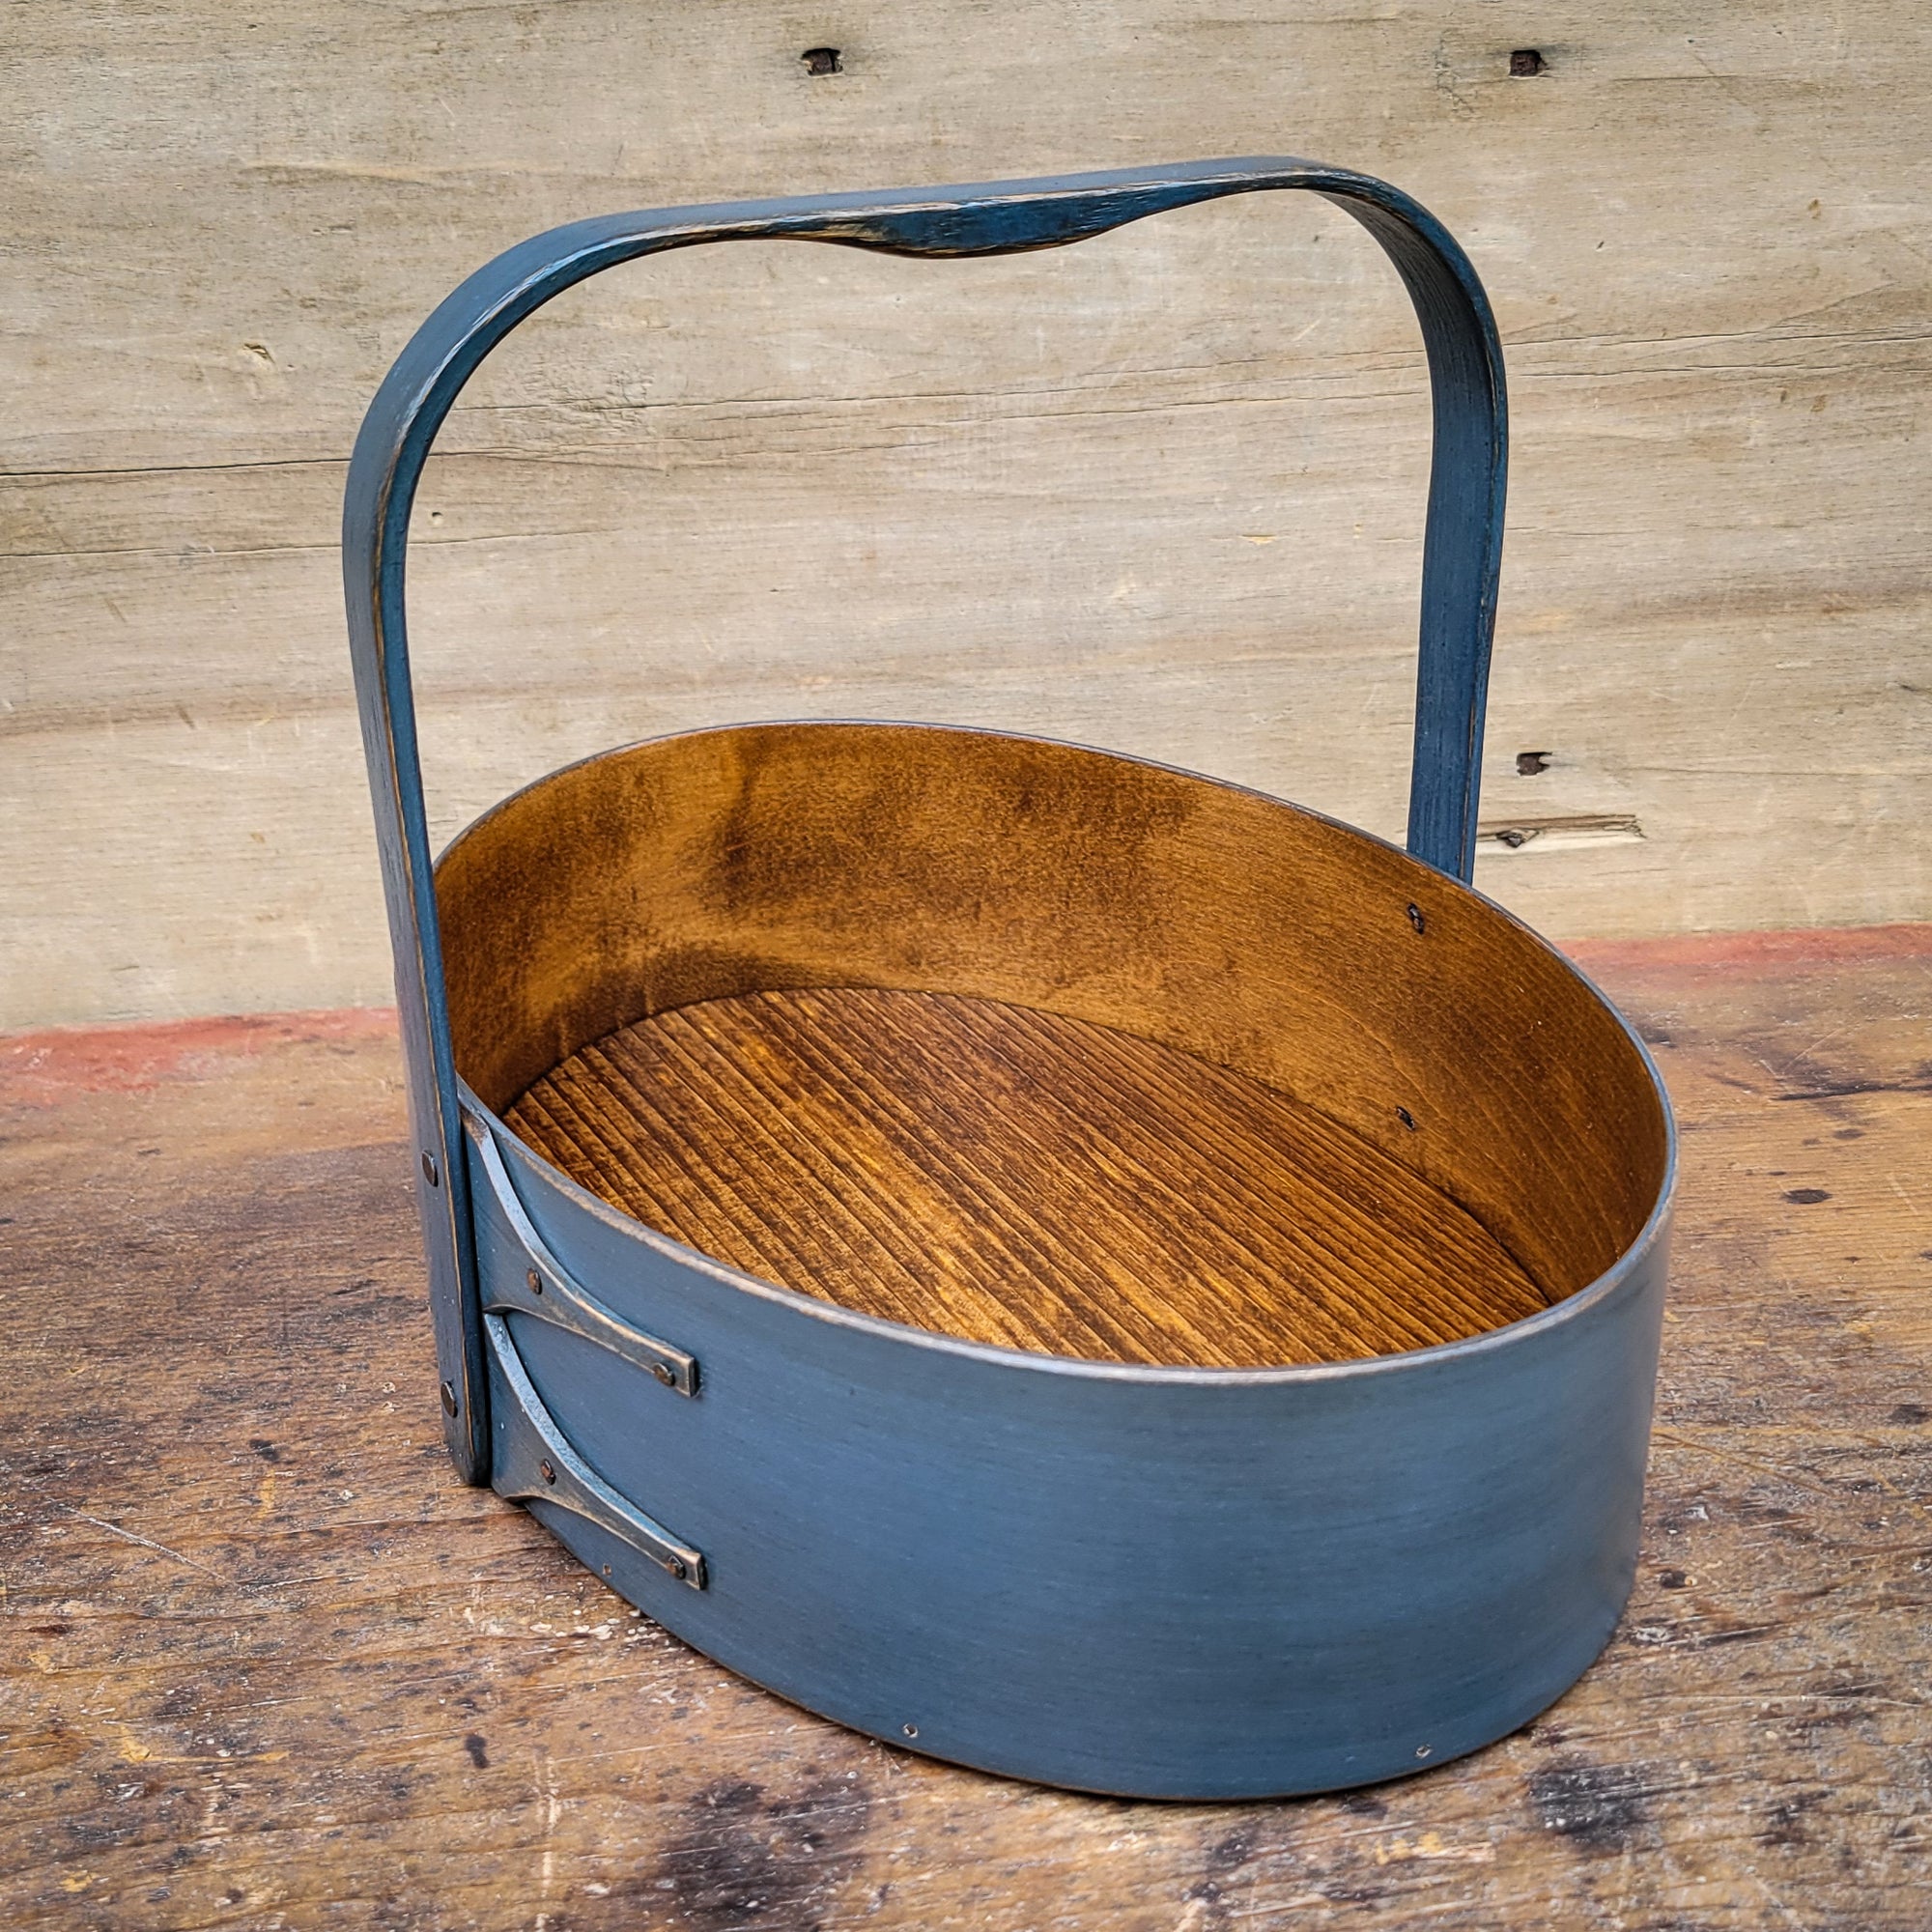 Medium Shaker Style Sewing Carrier, LeHays Shaker Boxes, Handcrafted in Maine, Blue Milk Paint Finish, Side View